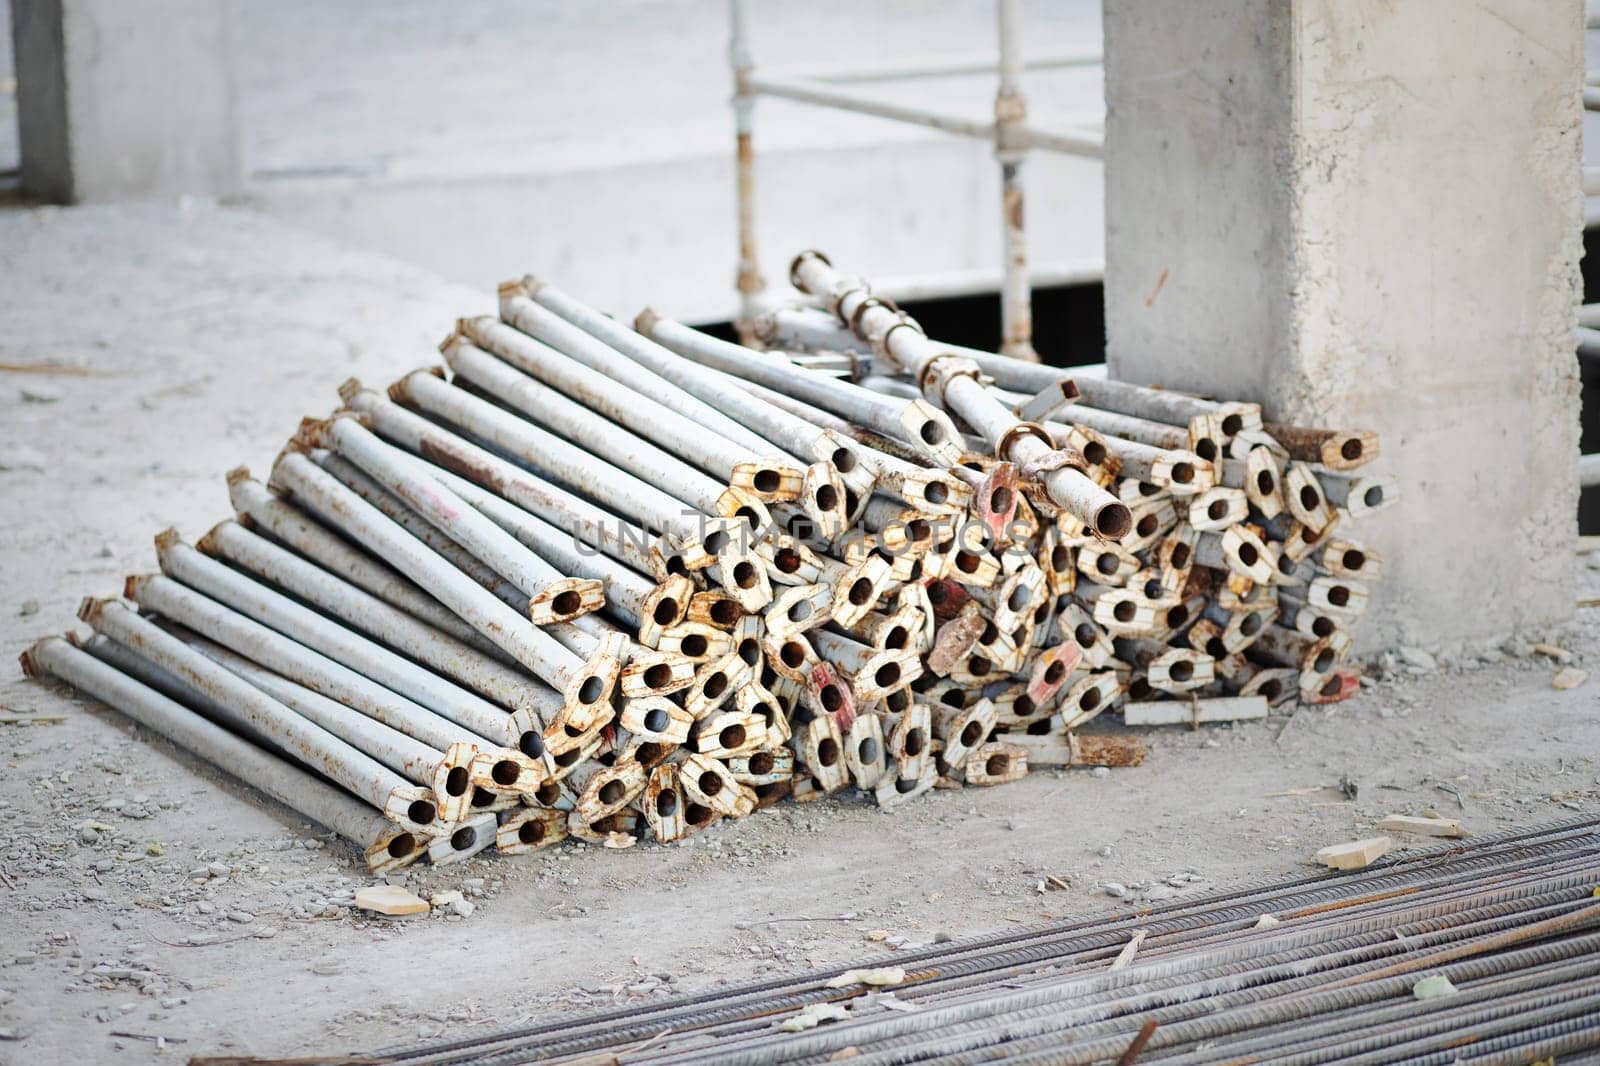 Scaffolding racks in disassembled form lie near a reinforced concrete column on a construction site by Rom4ek